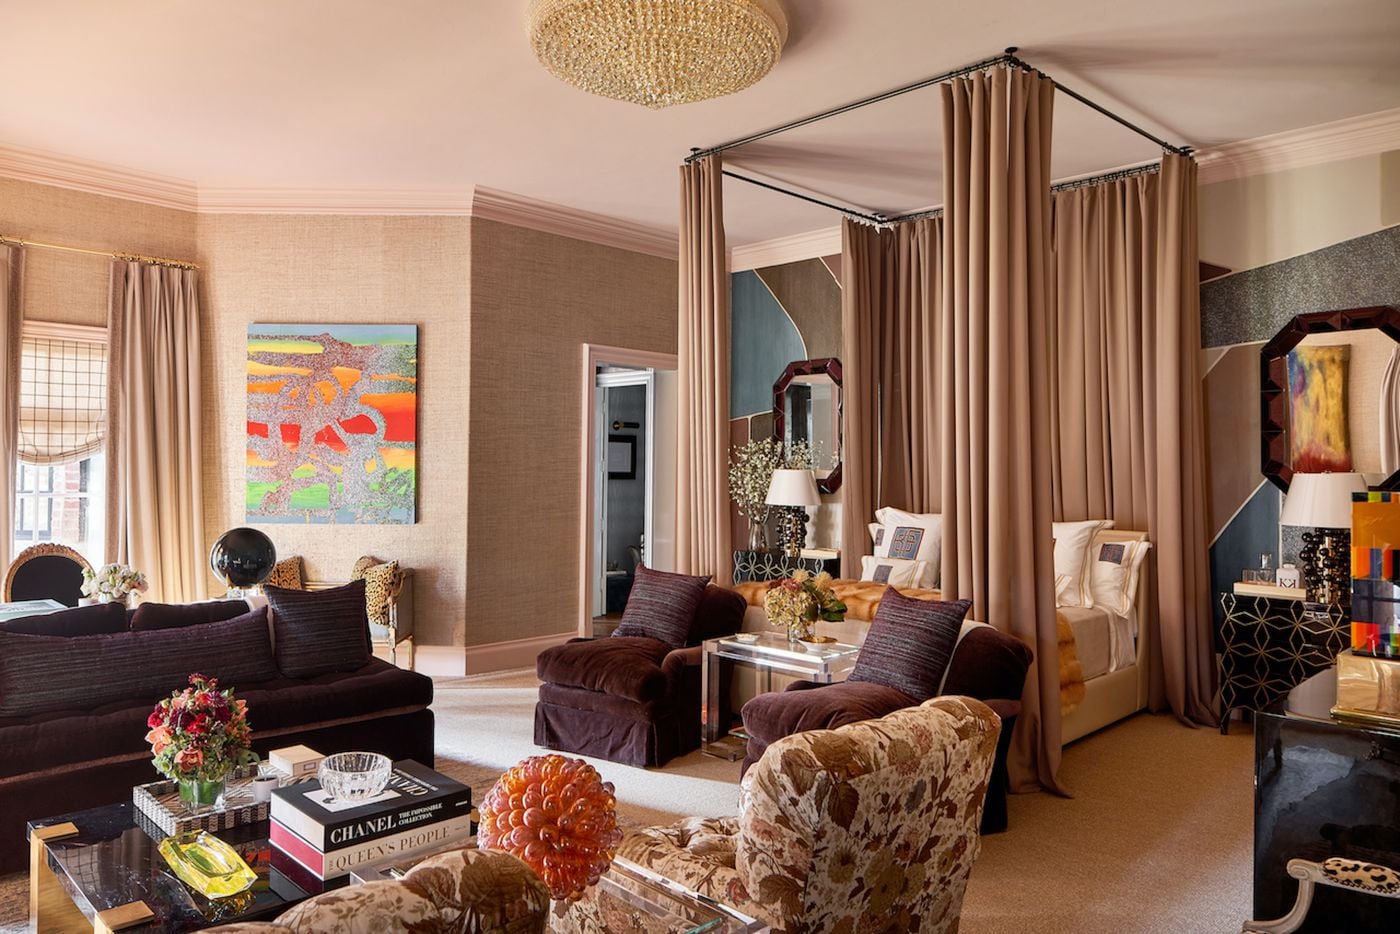 The primary bedroom at the Kips Bay Decorator Show House Dallas. This room was designed by Kirsten Kelli, LLC.